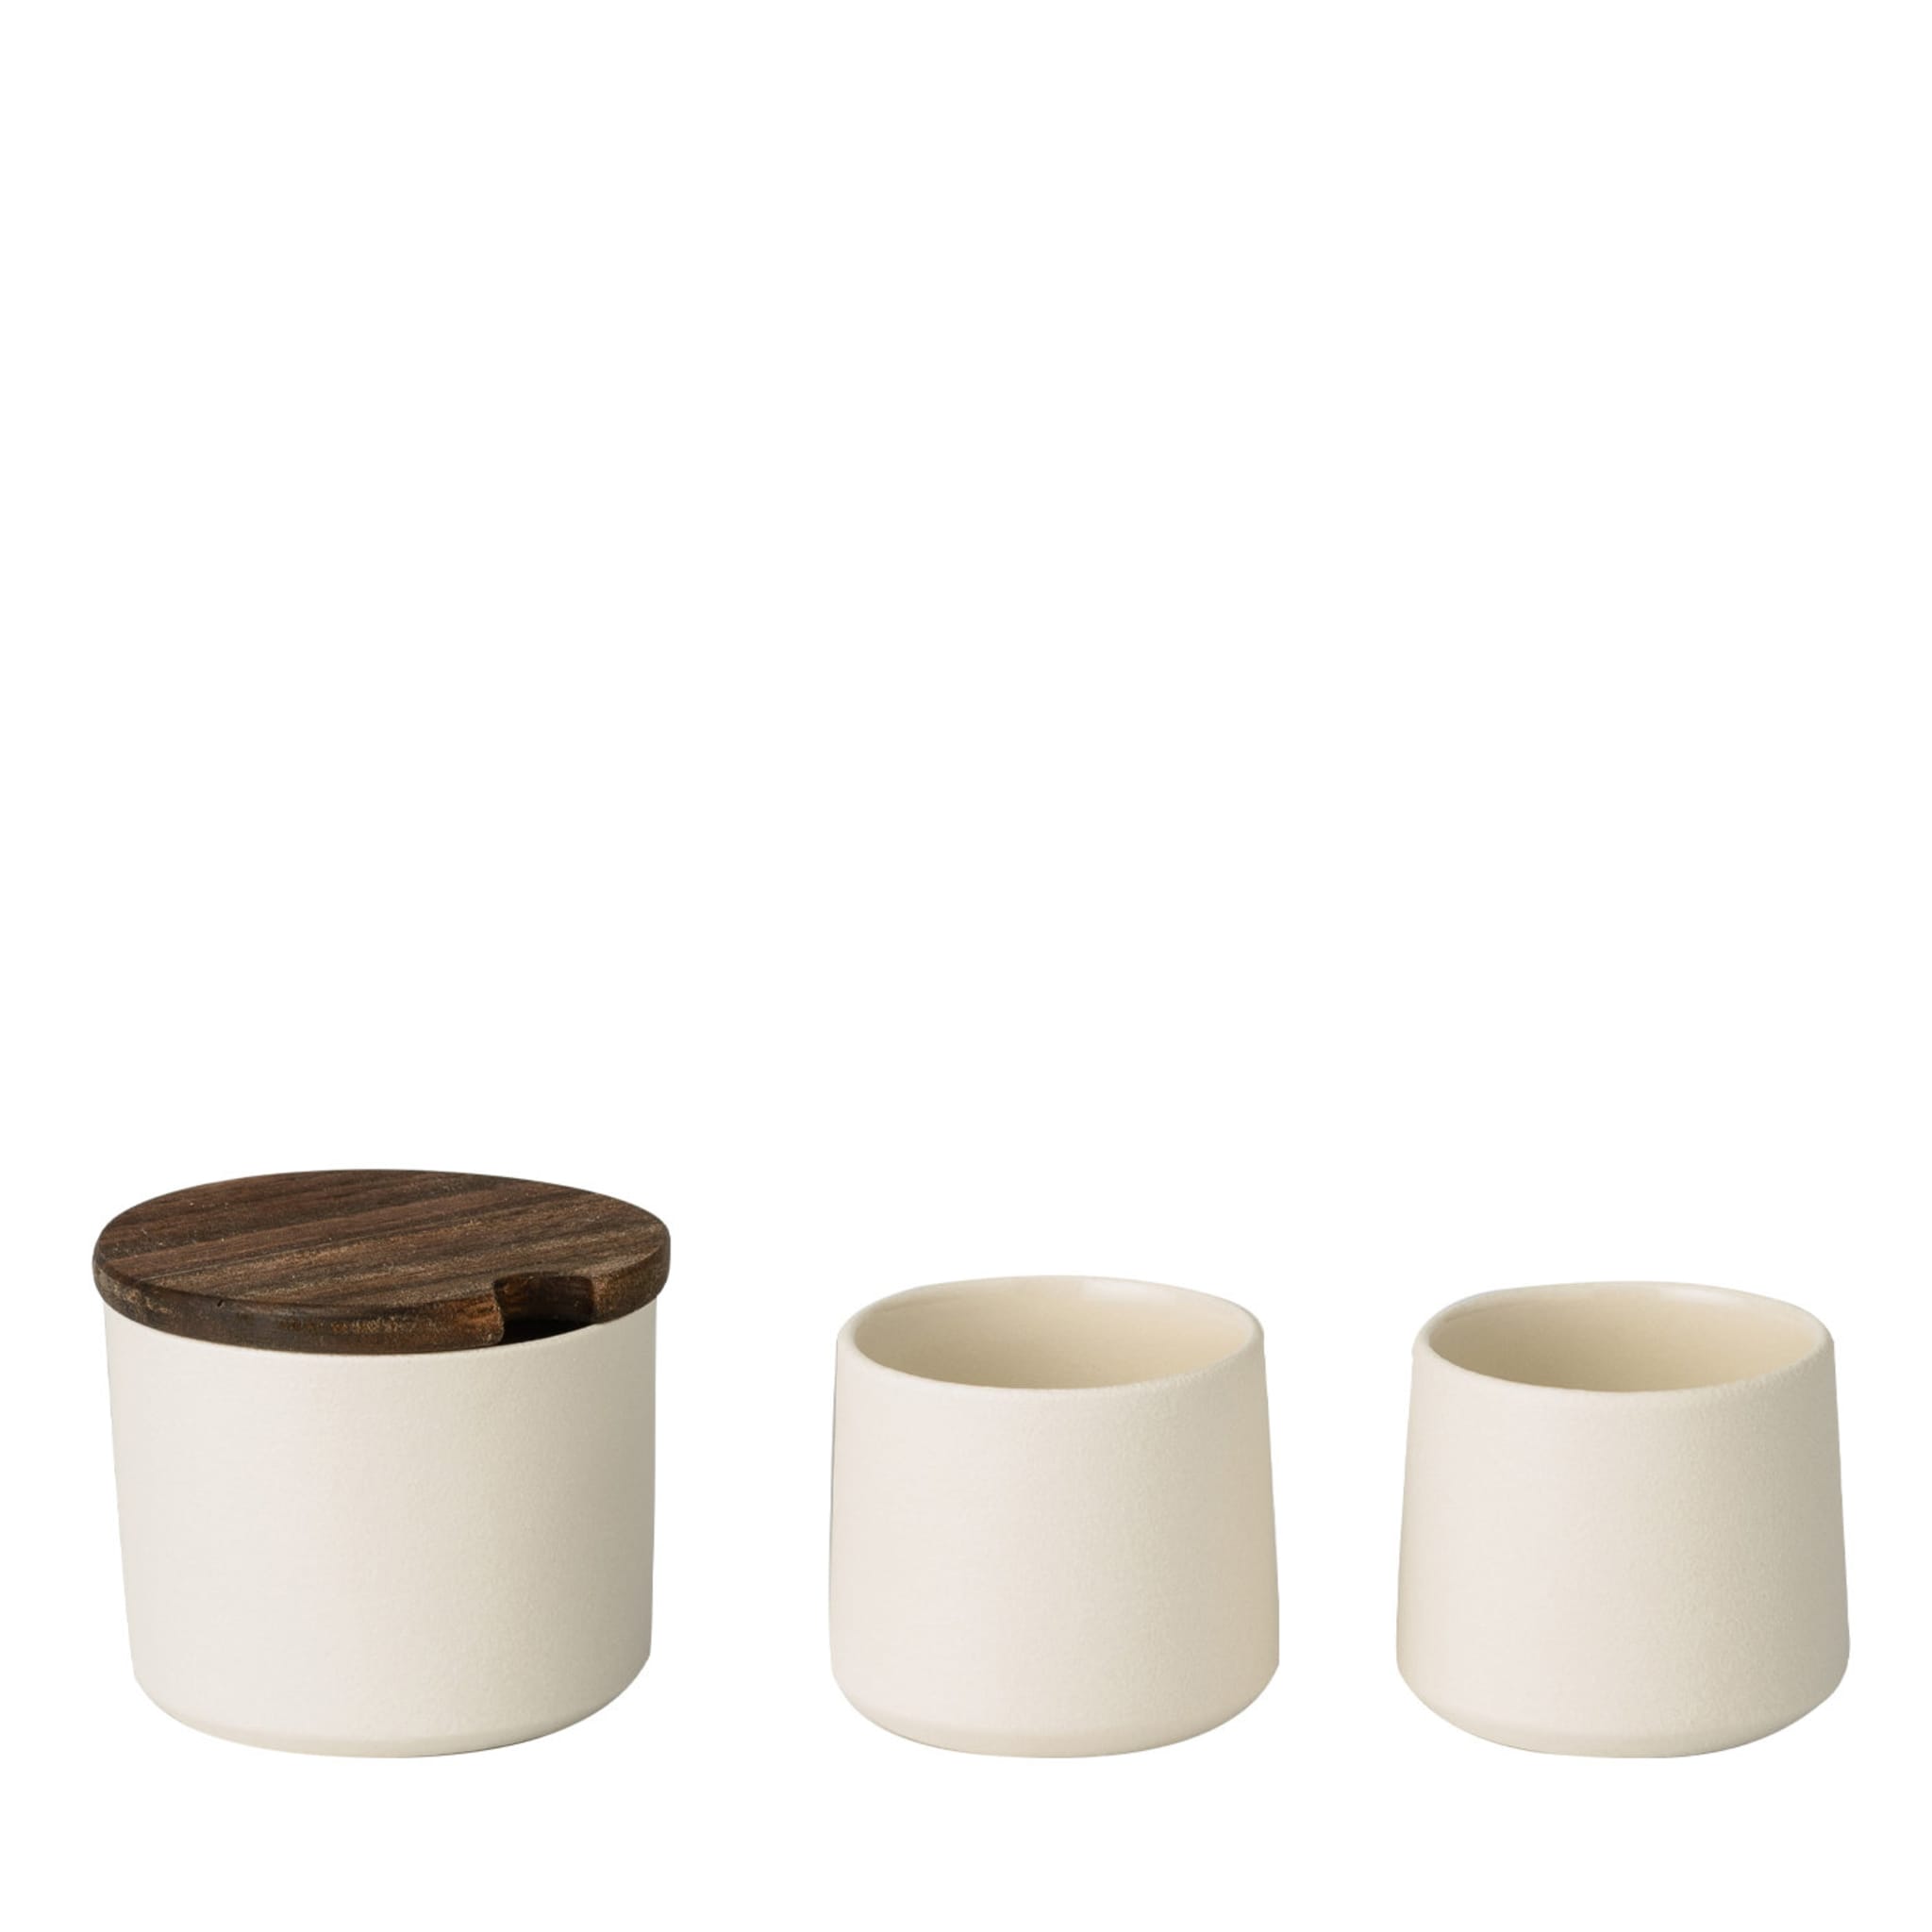 Ceramic Sugar Bowl with Wooden Lid and Small Ceramic Cups - Main view